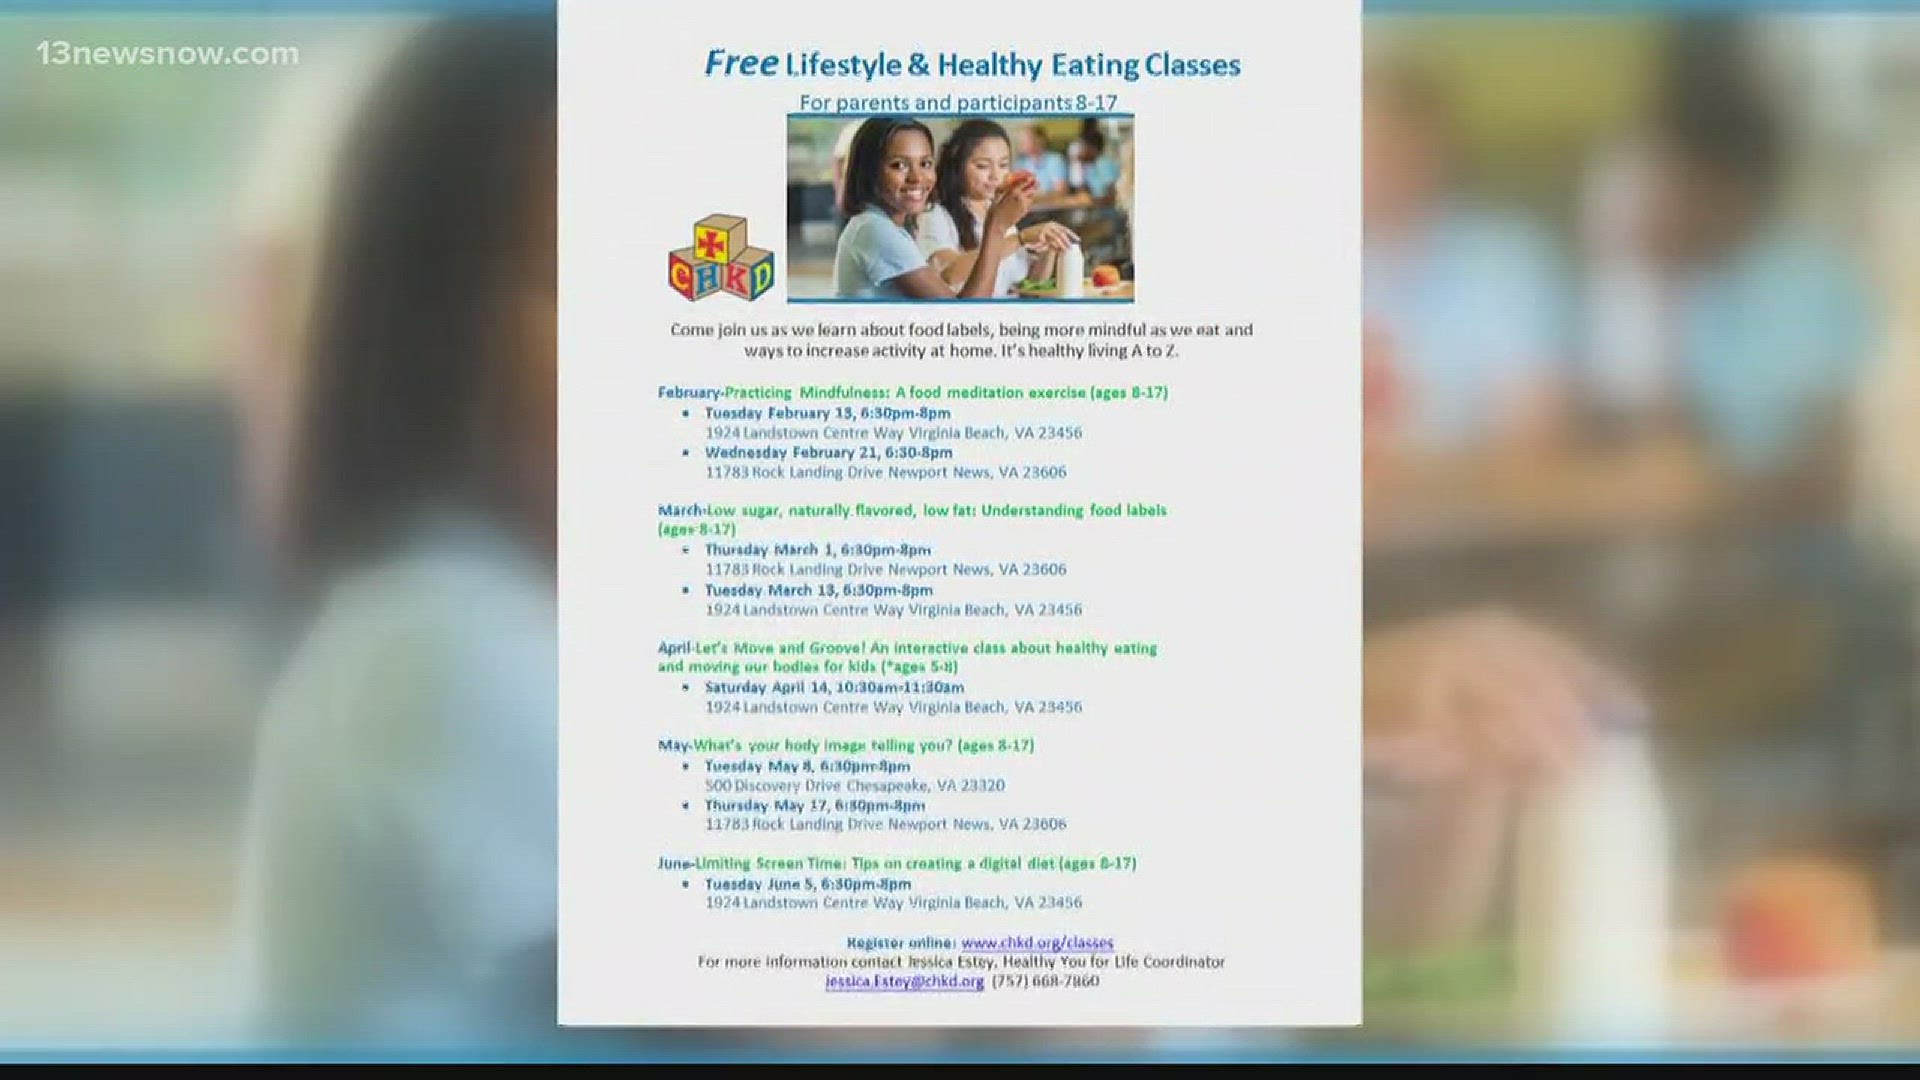 CHKD's Healthy You for Life Program